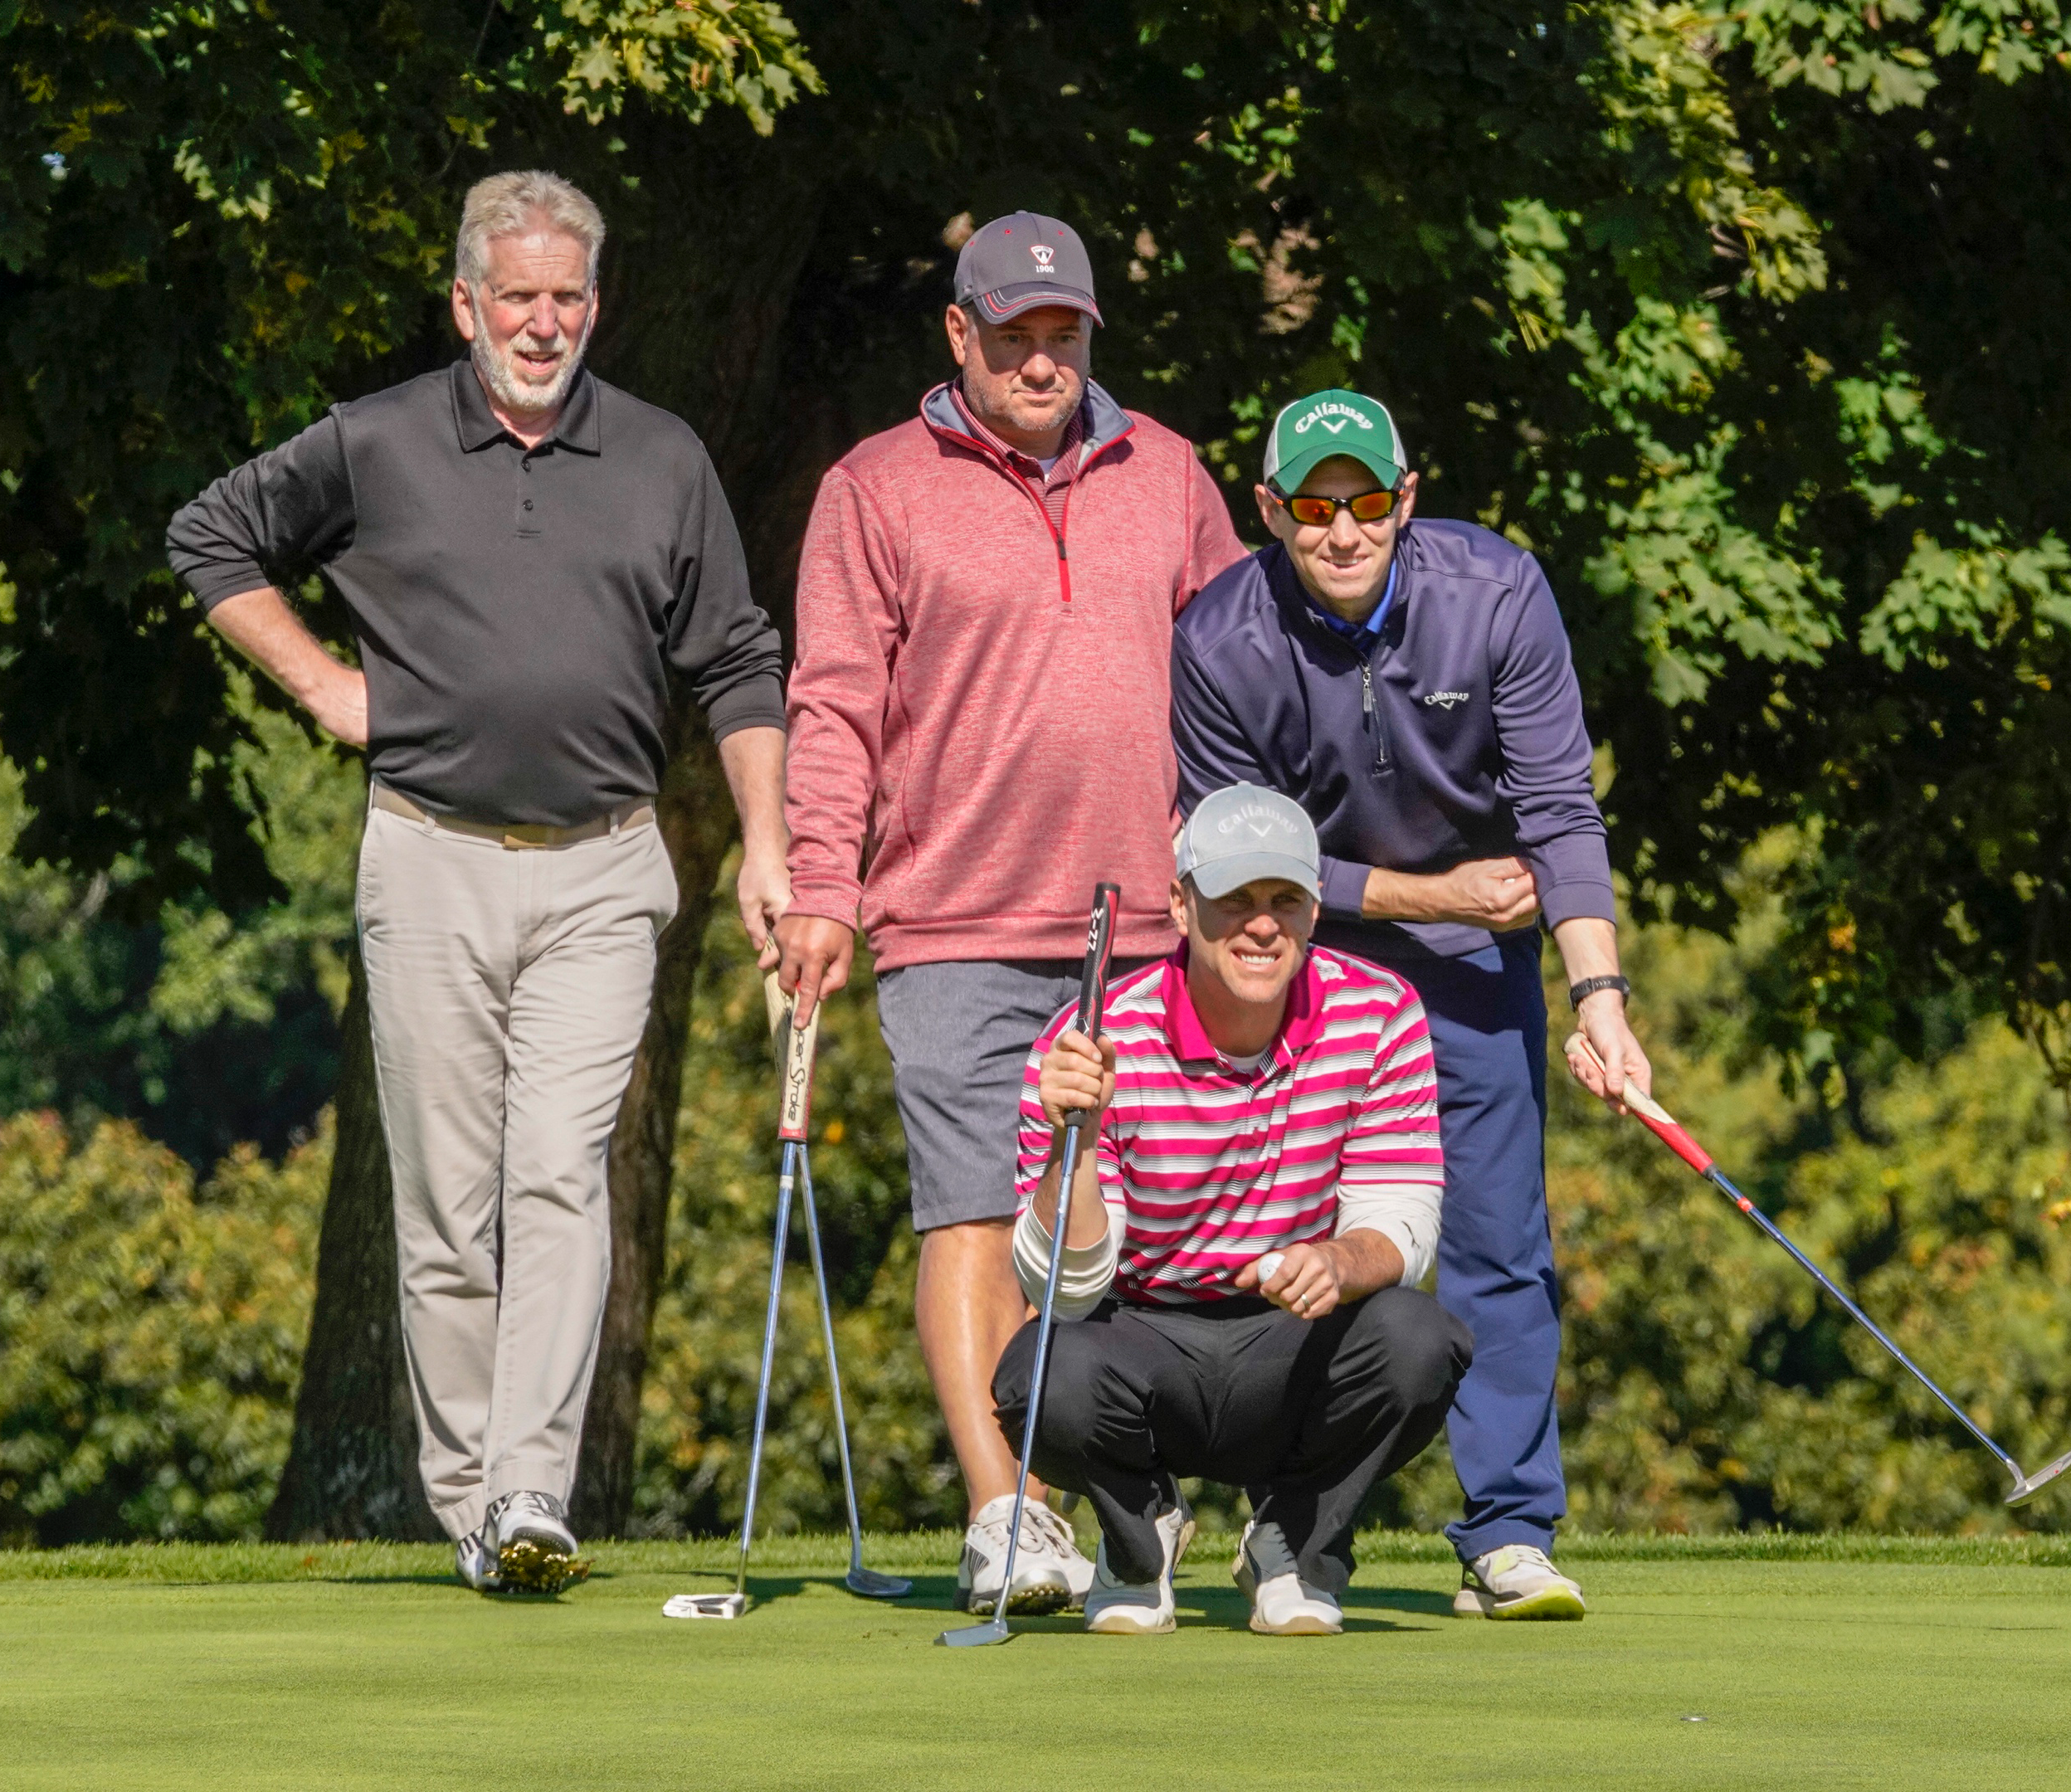 Four people stand on a golf green. One crouches, looking toward a cup.